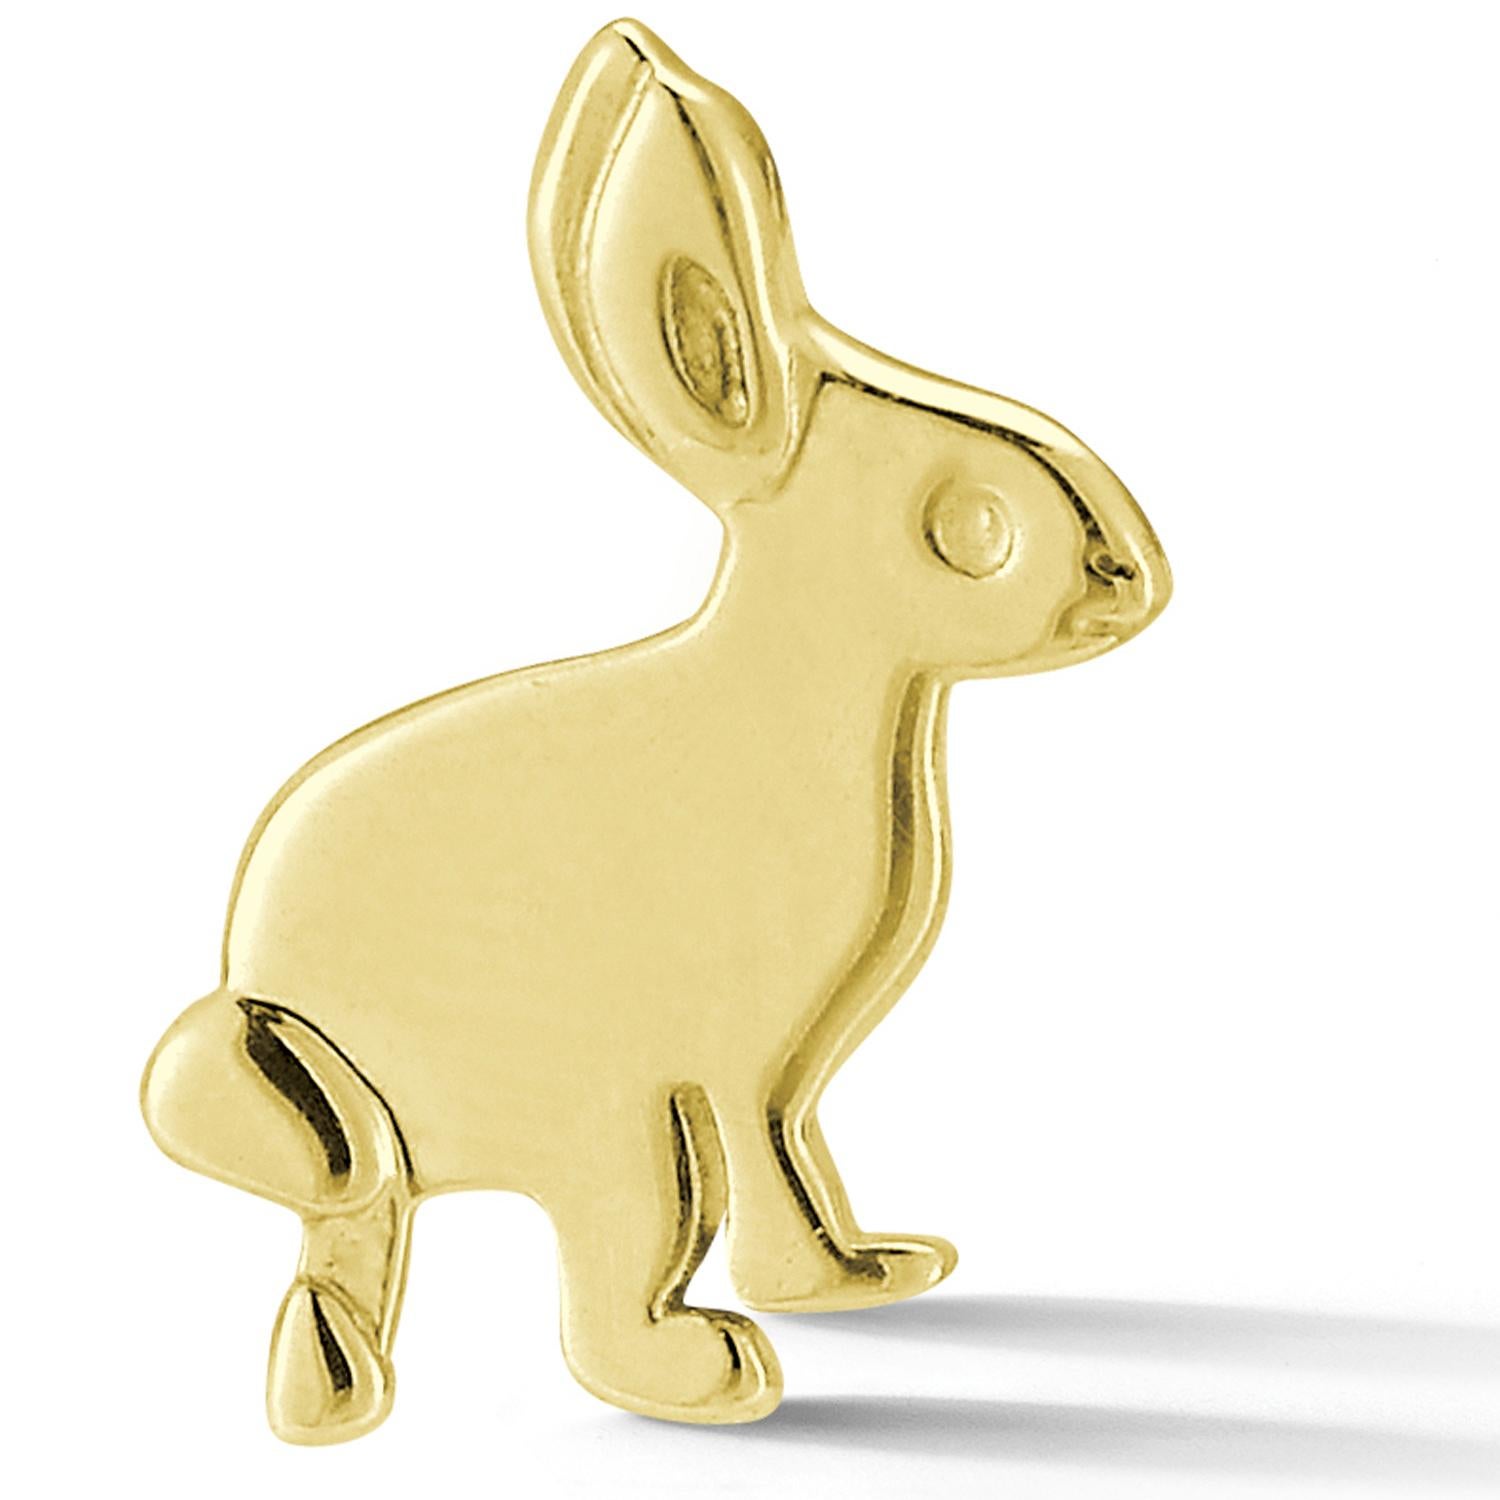 These adorable bunny stud earrings wears well on your ear lobes all day long. 

A great everyday earring with a bit of whimsy and cuteness, it's also the year of the Rabbit this year!

Dimensions: 10mm Height x 8mm Width x 1.2mm thickness

14 Karat